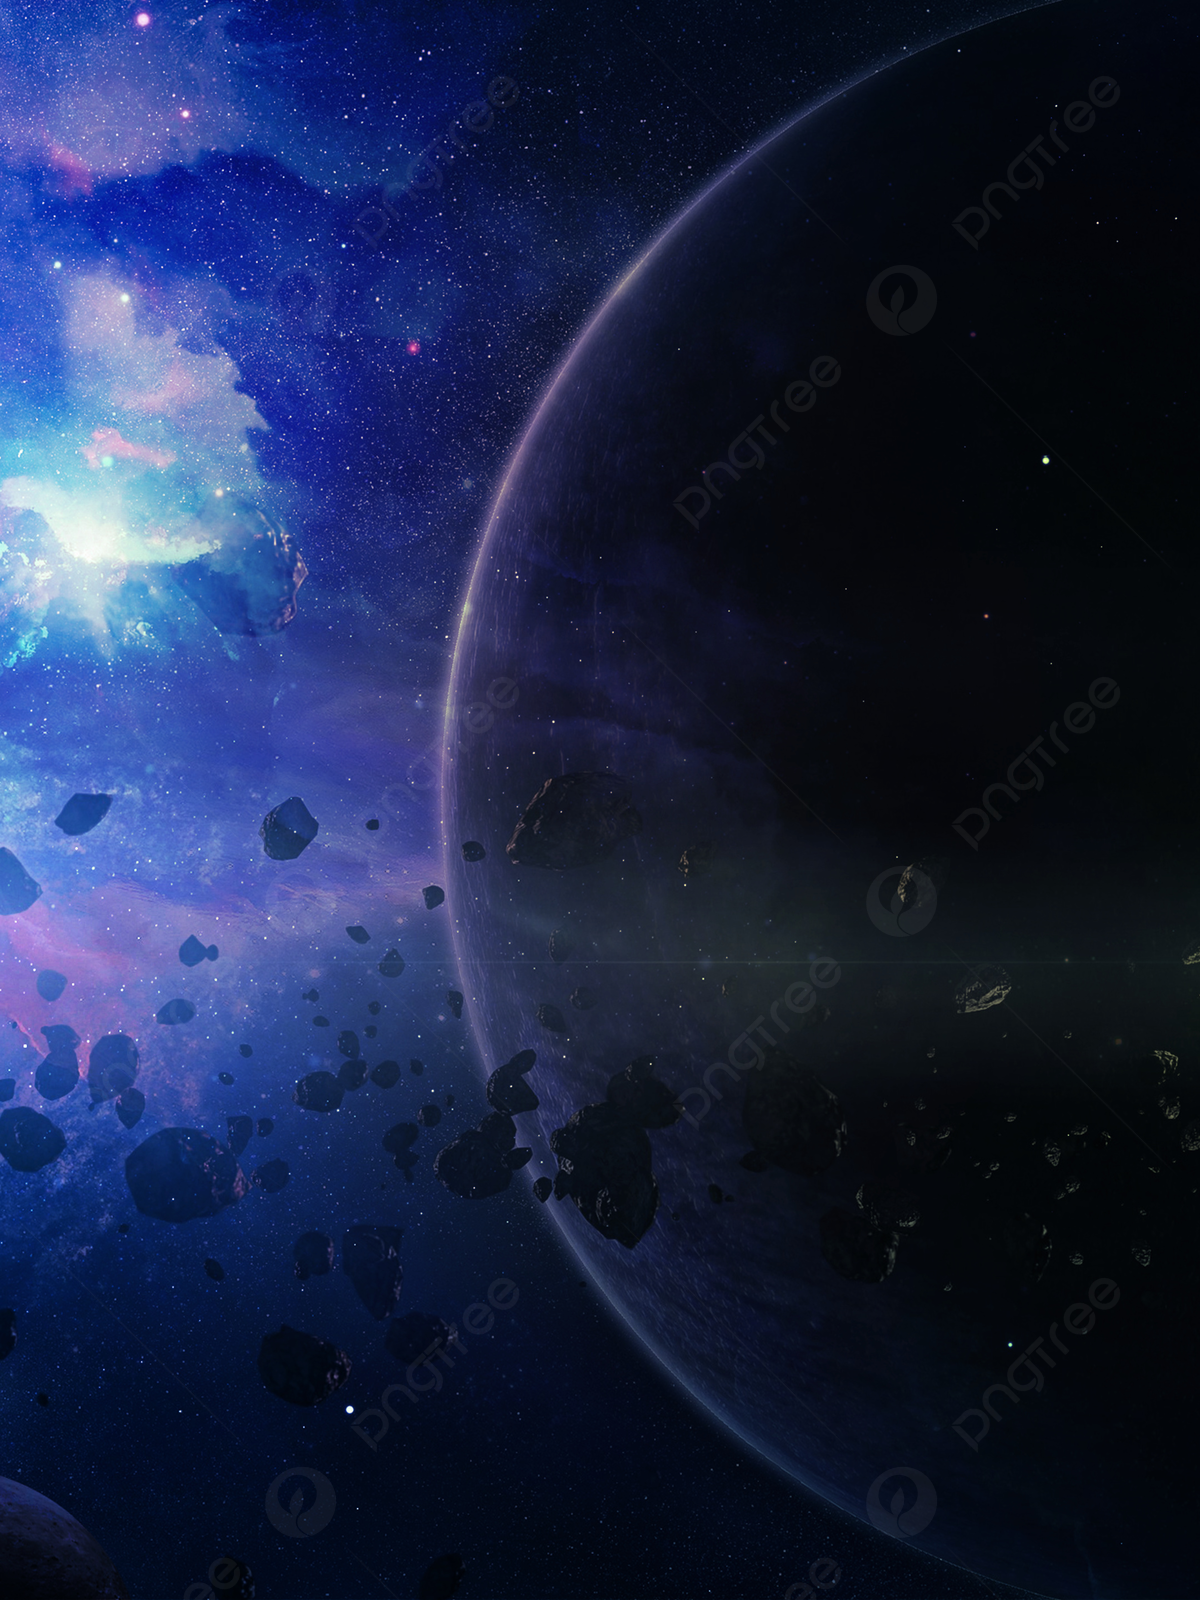 Science And Technology Planet Background Material, Science Fiction, Technology Exhibition Board, Exhibition Board Background】popular Background Image for Free Download